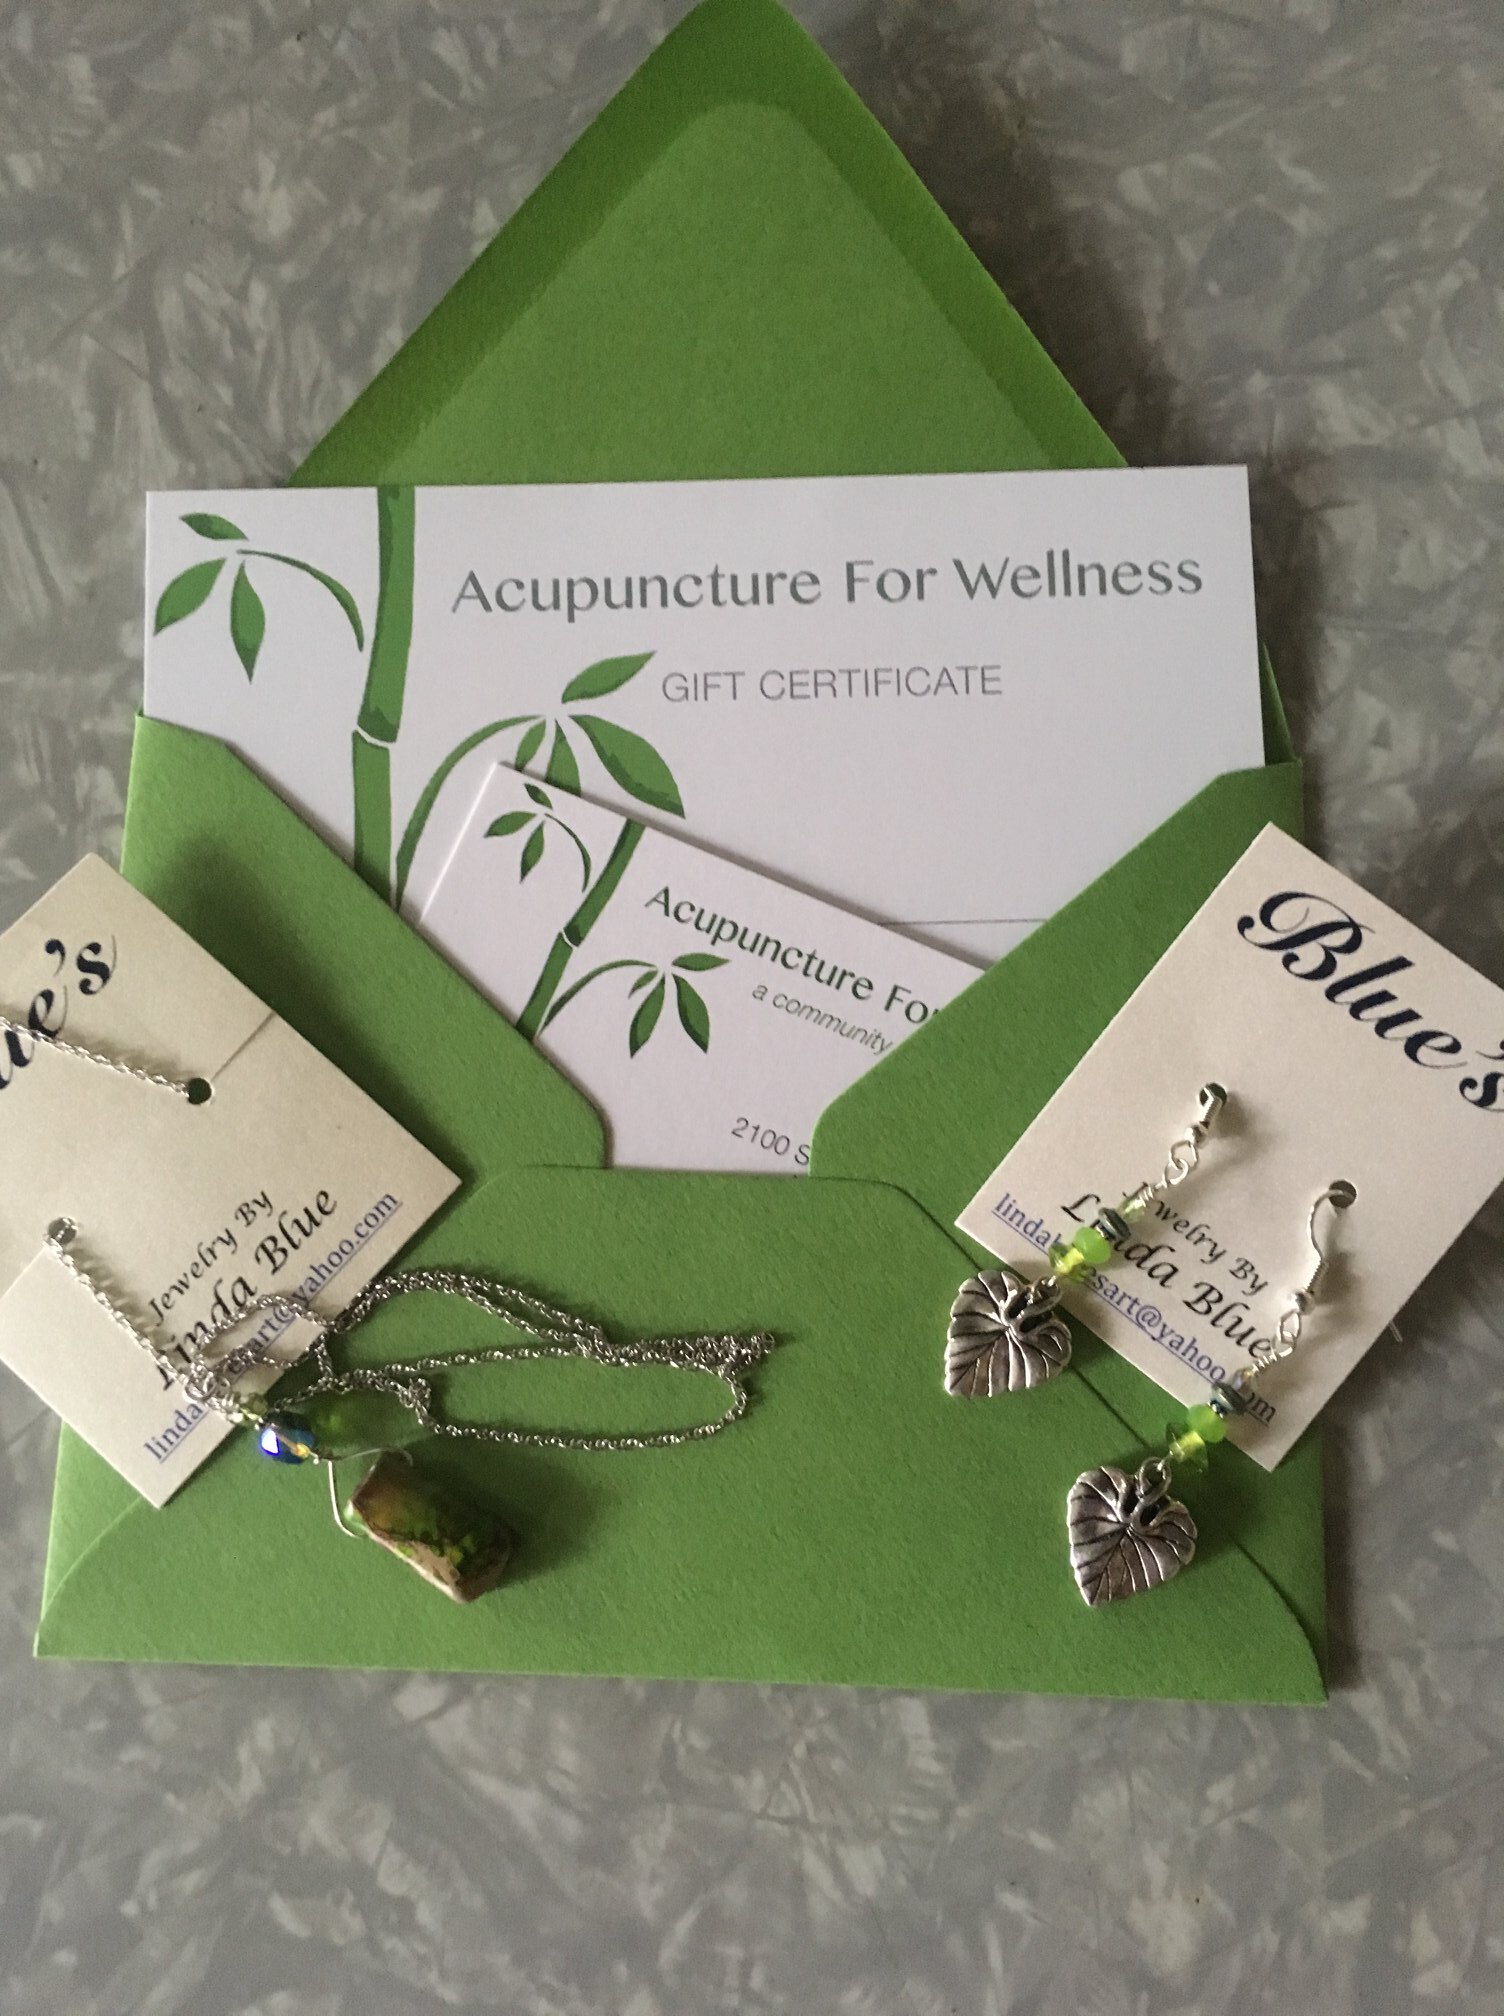 MPF Auction acupuncture gift certificate.jpg